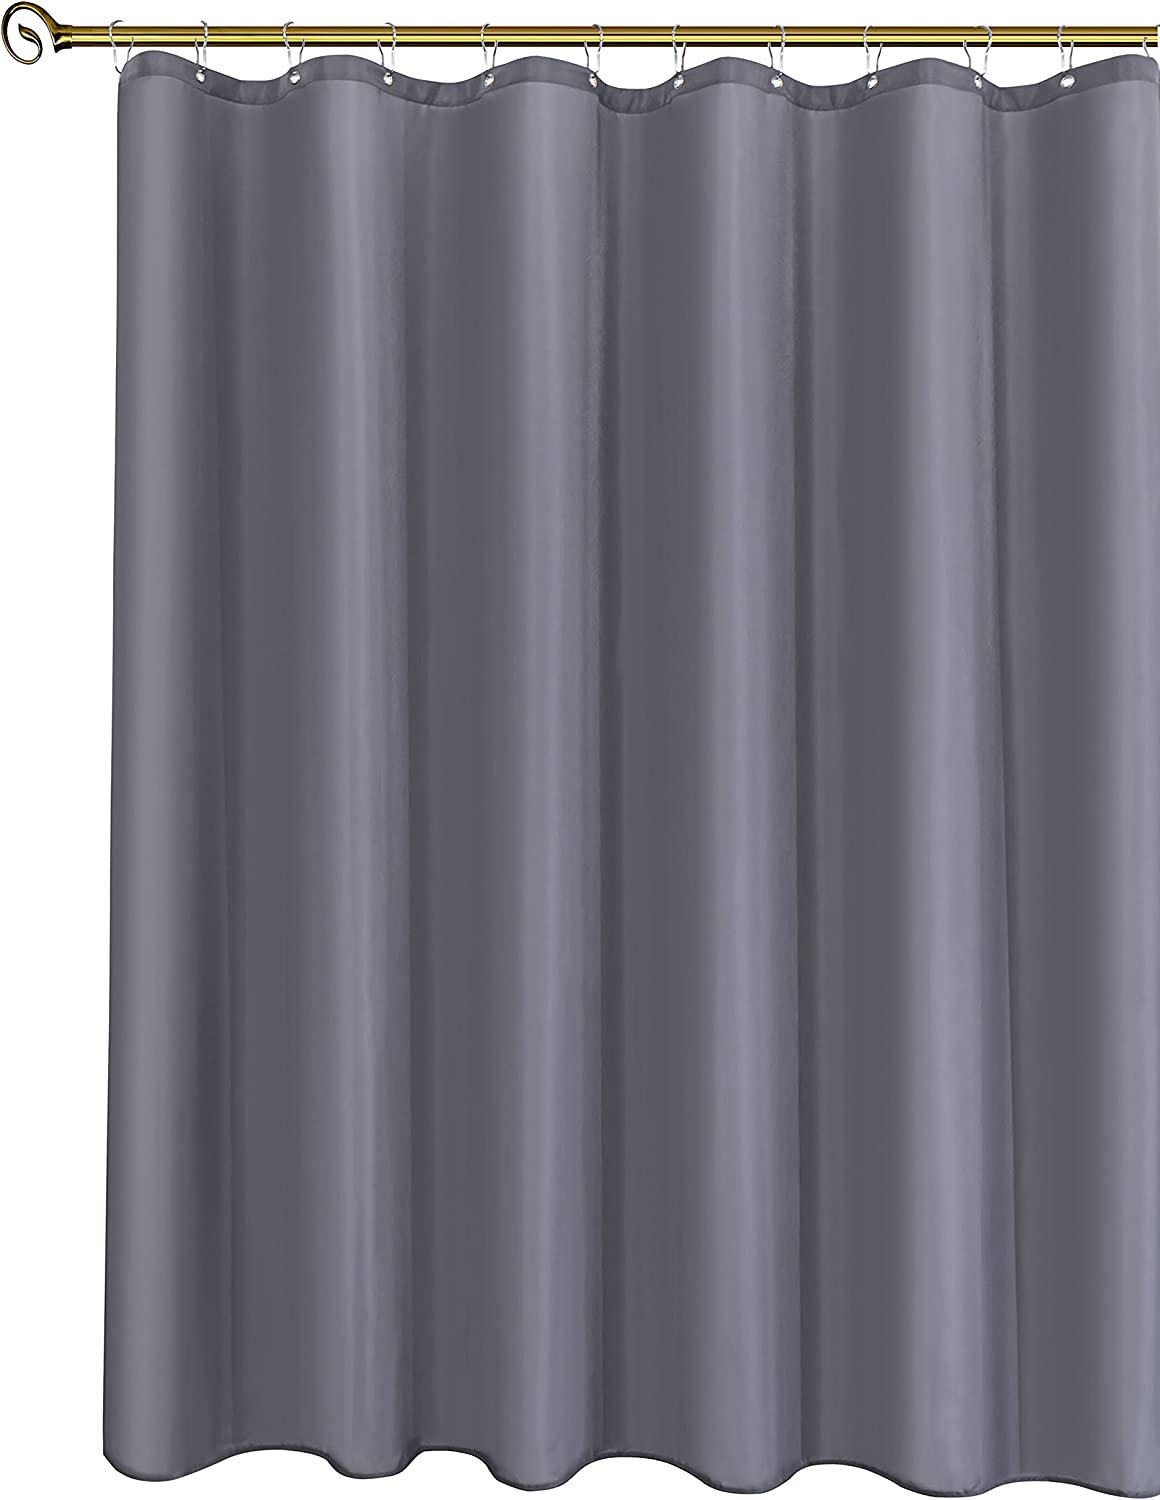 Biscaynebay Hotel Quality Fabric Shower Curtain Liner 72 Inch by 72 Inch, Dark Grey Water Resistant Bathroom Curtains Liners, Rust Resistant Grommets Top Weighted Bottom Hem Machine Washable